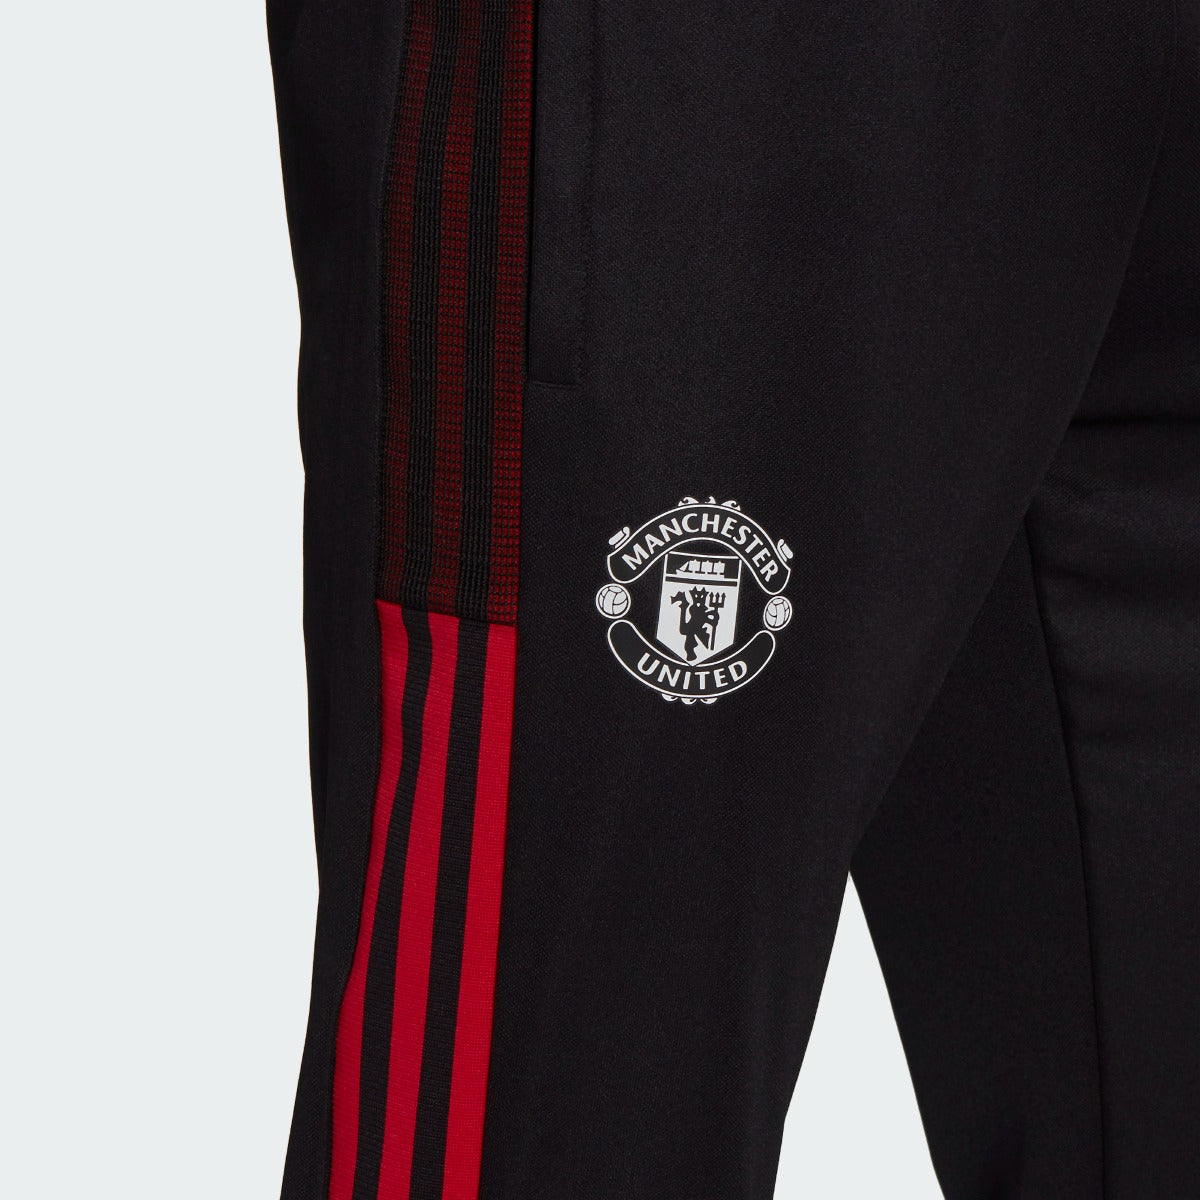 Adidas 2021-22 Manchester United Training Pants - Black-Red (Detail 1)